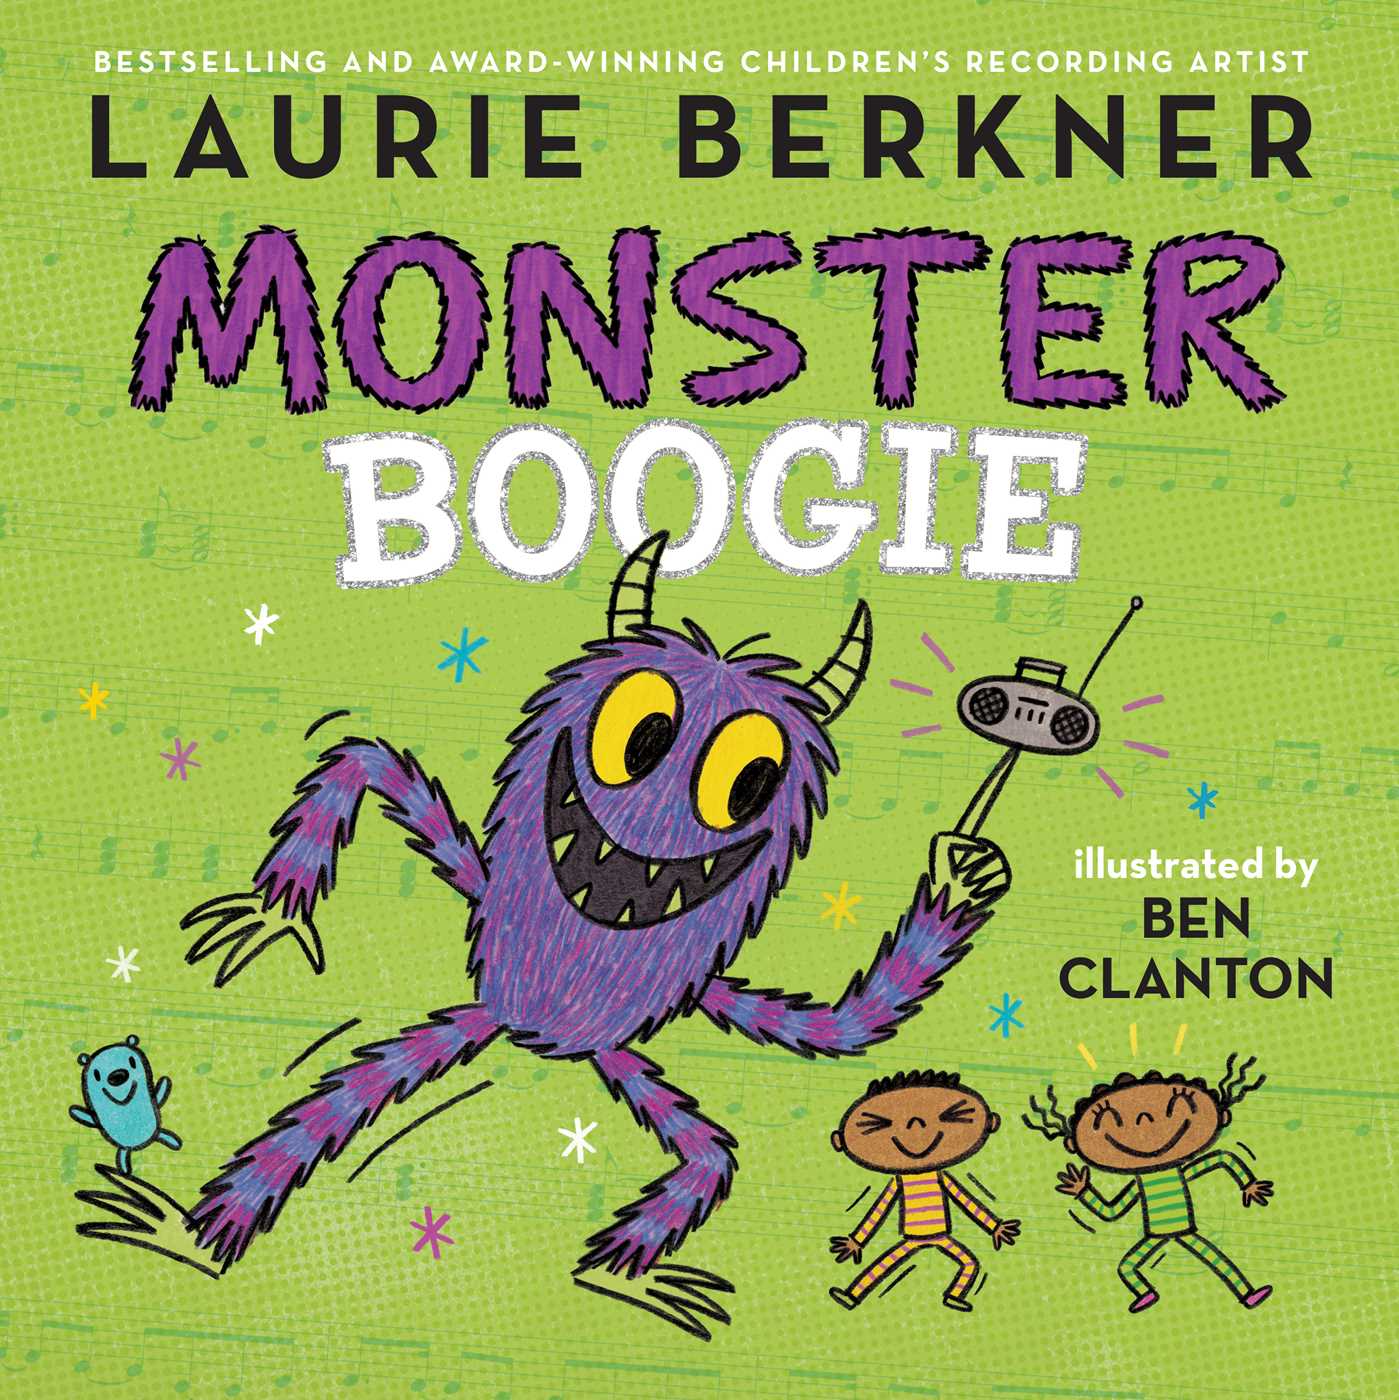 Cover of "Monster Boogie" by Laurie Berkner & Ben Clanton, featuring a fuzzy purple monster dancing with two children.